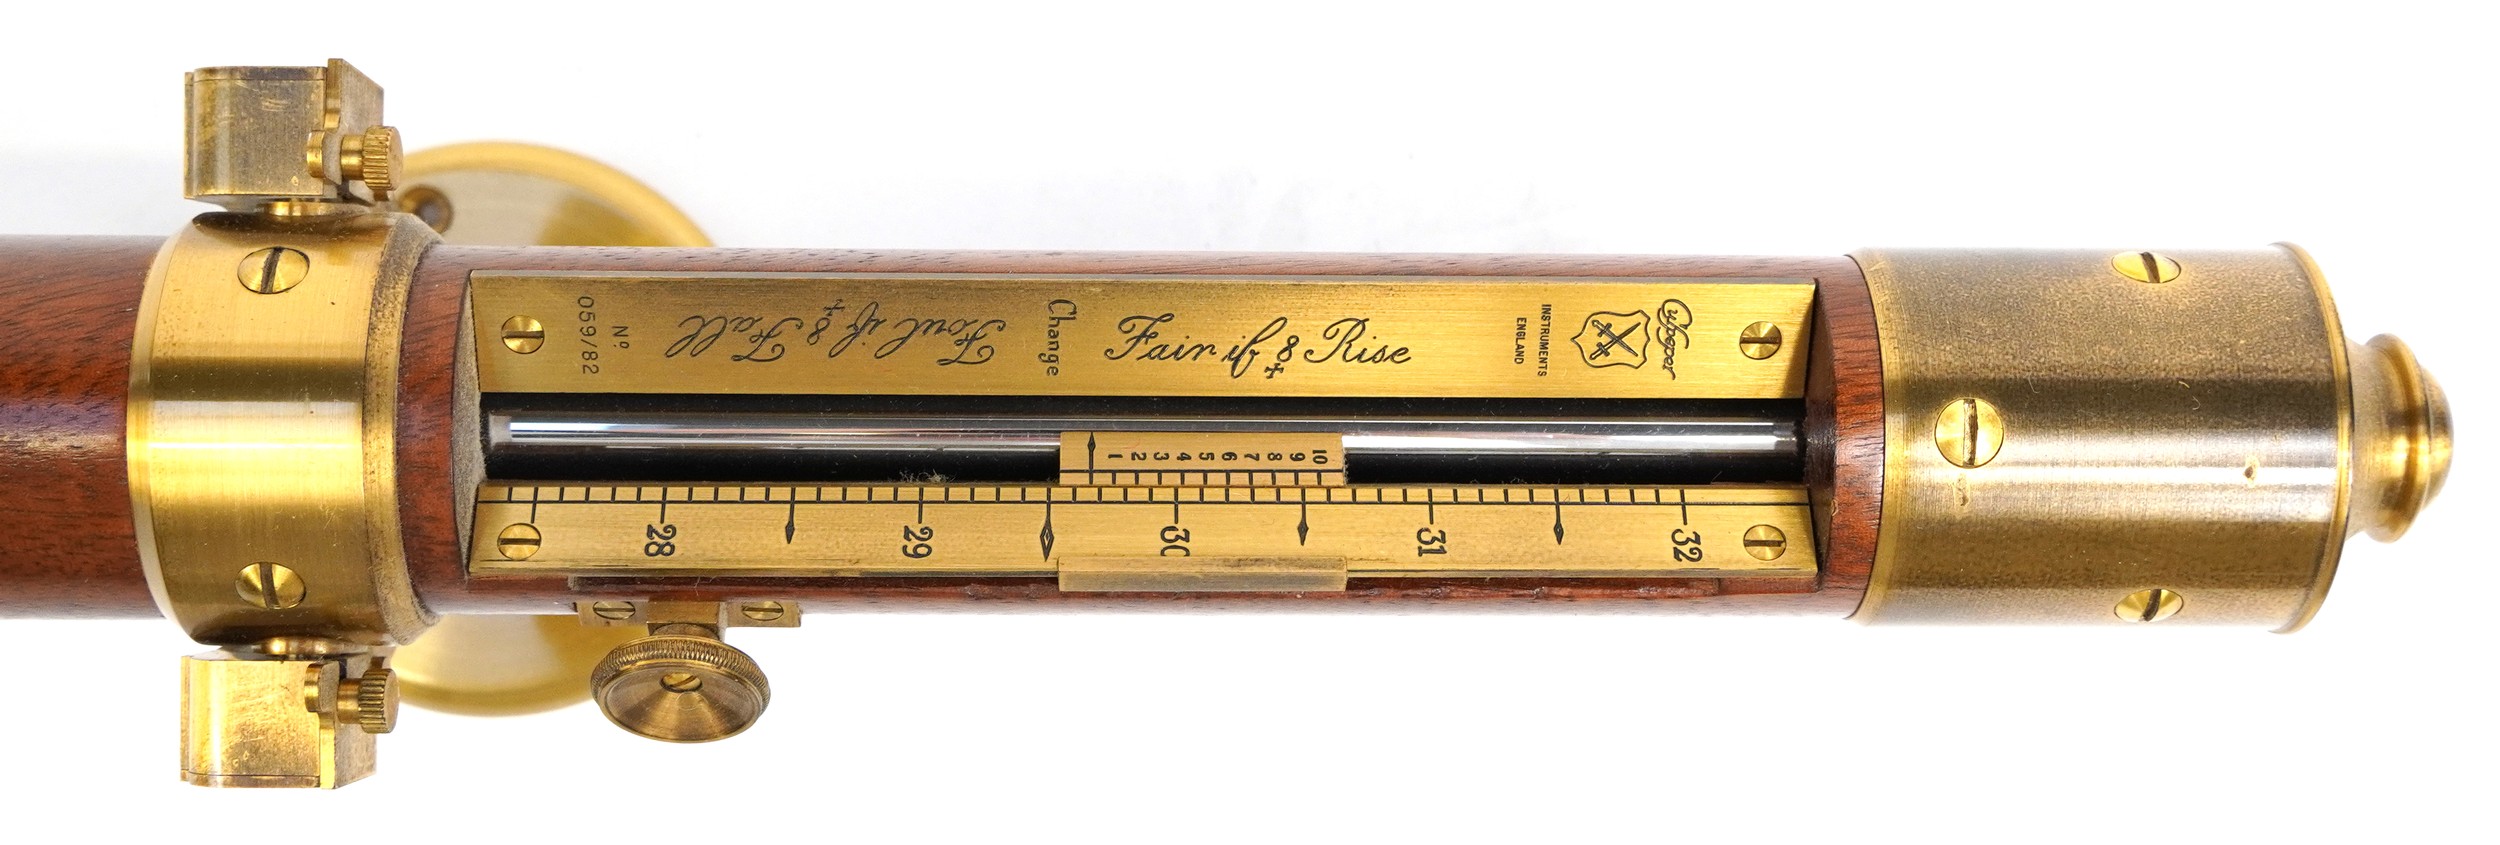 Mahogany and brass ship's stick barometer by Culpeper Instruments numbered 059/82, 96.5cm in length - Image 2 of 3